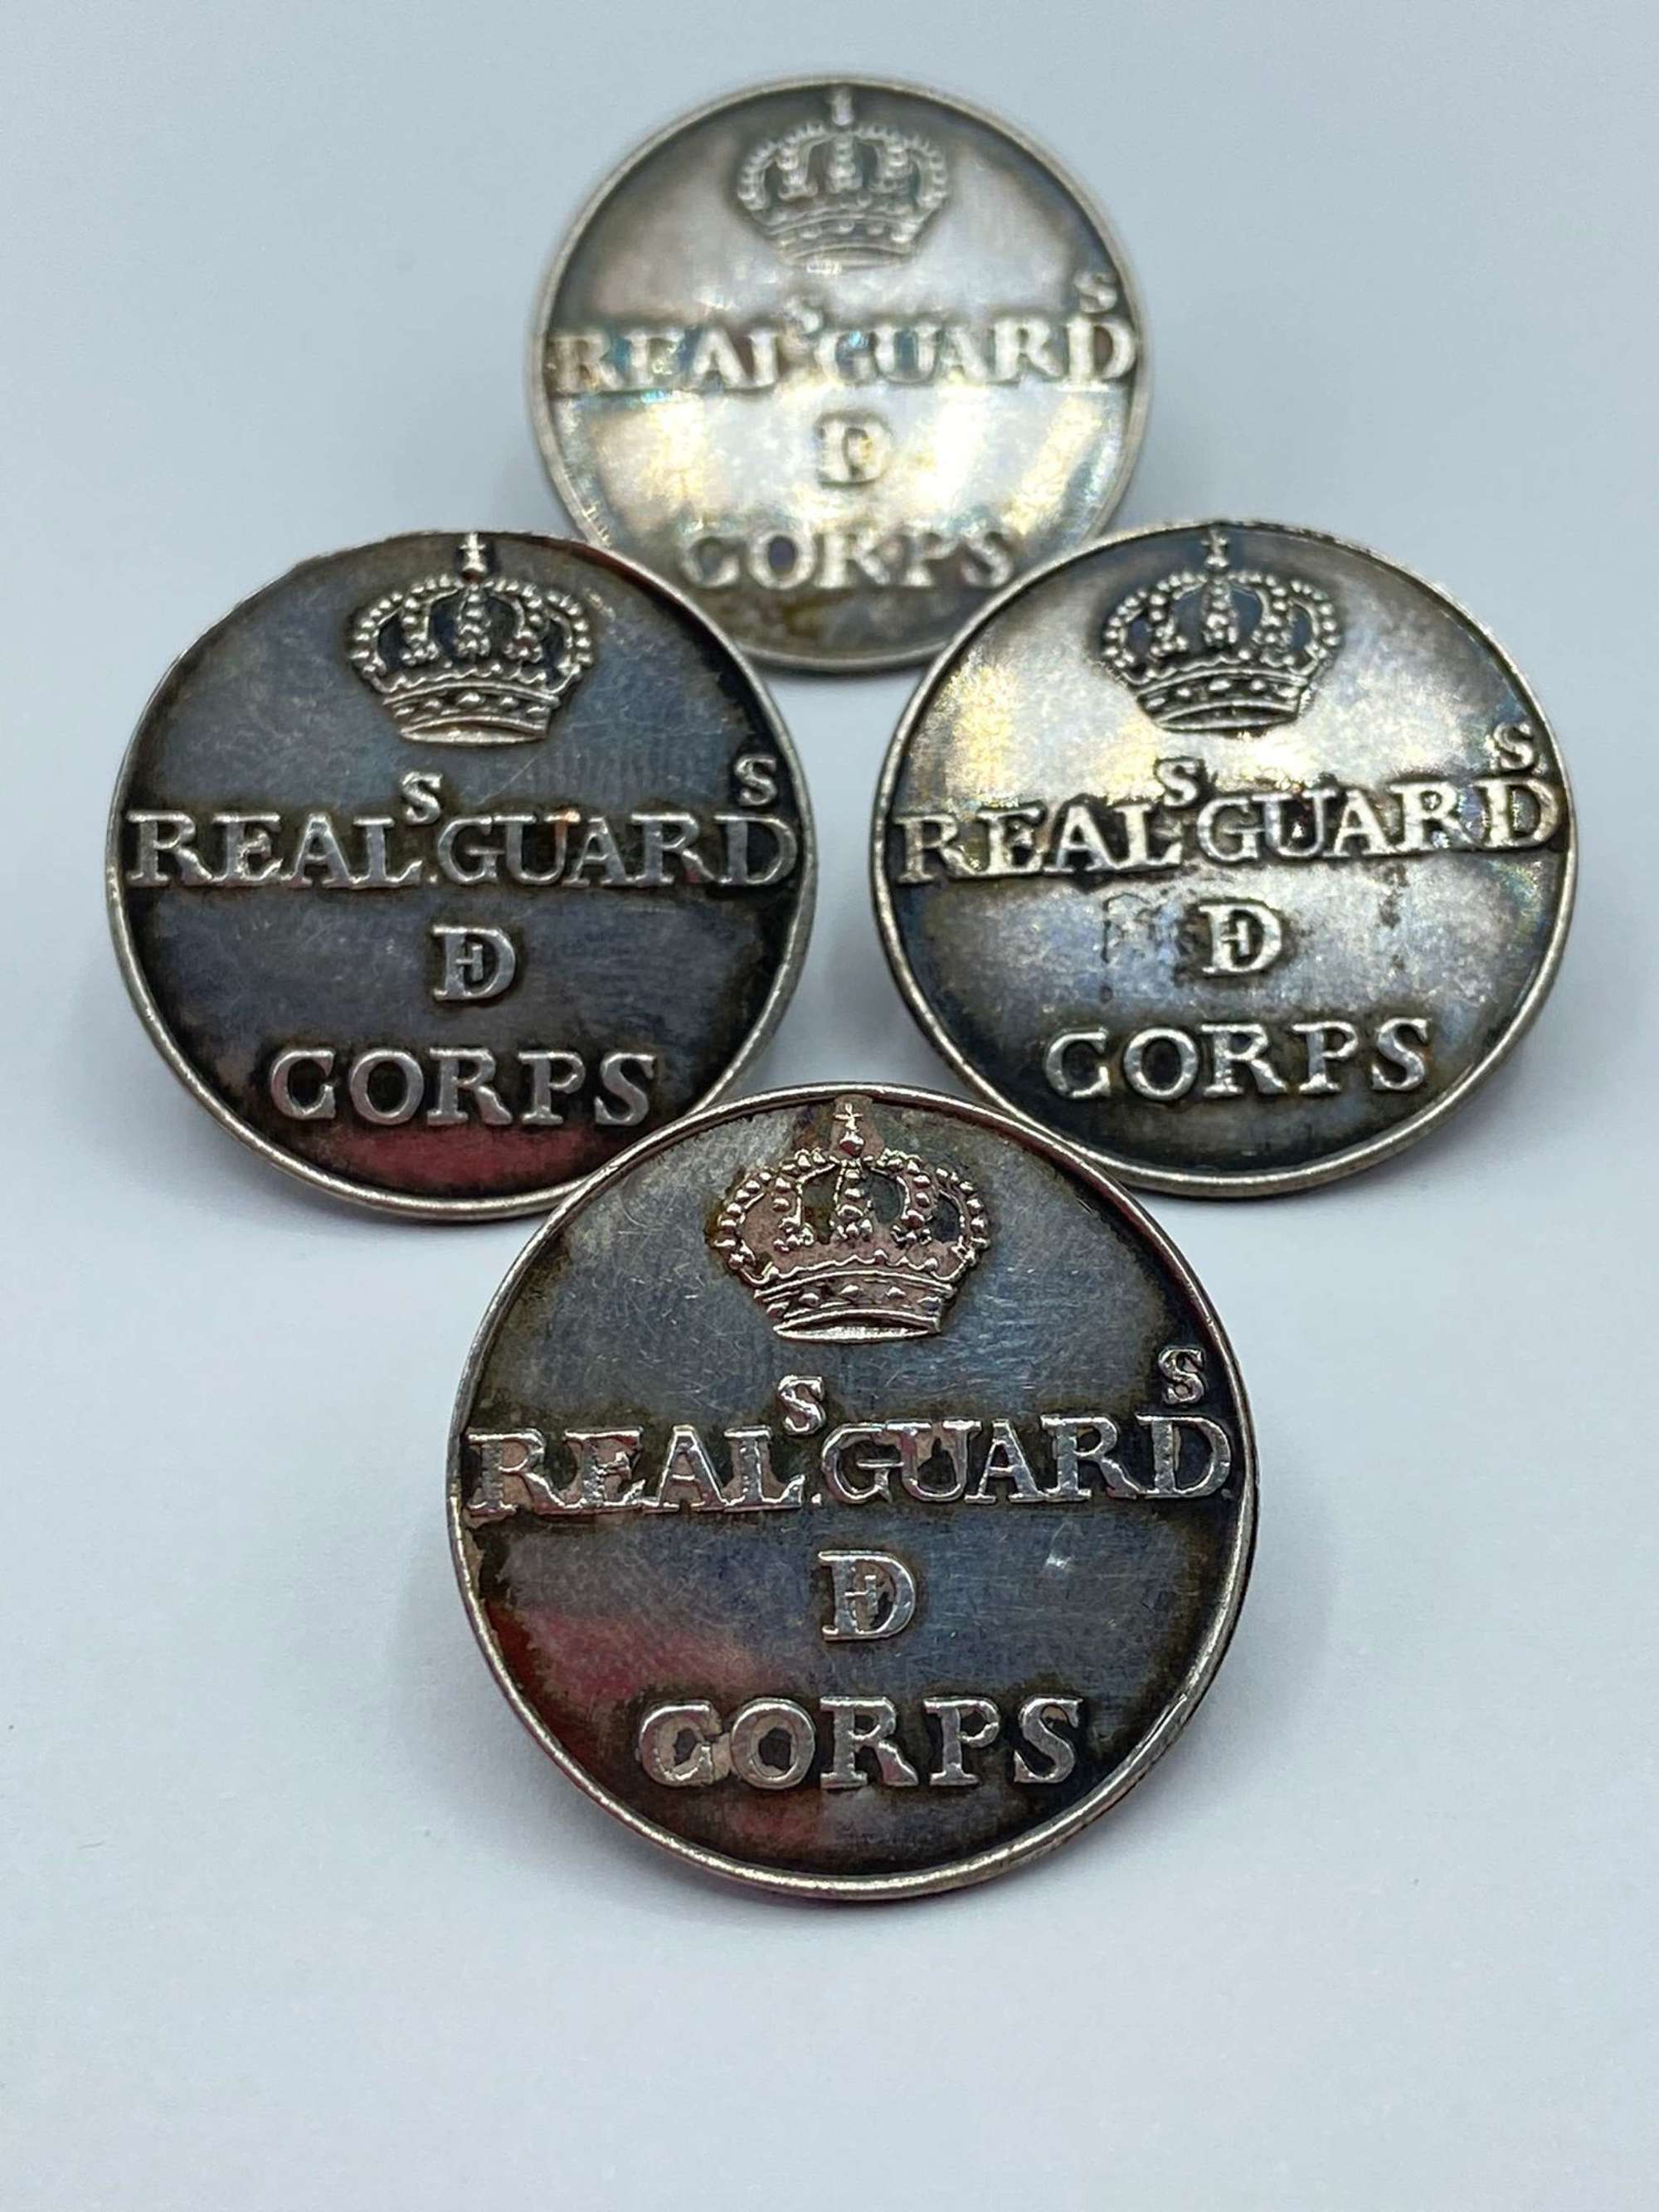 1792-1802 French Revolutionary Wars Reales Guardias de Corps Buttons